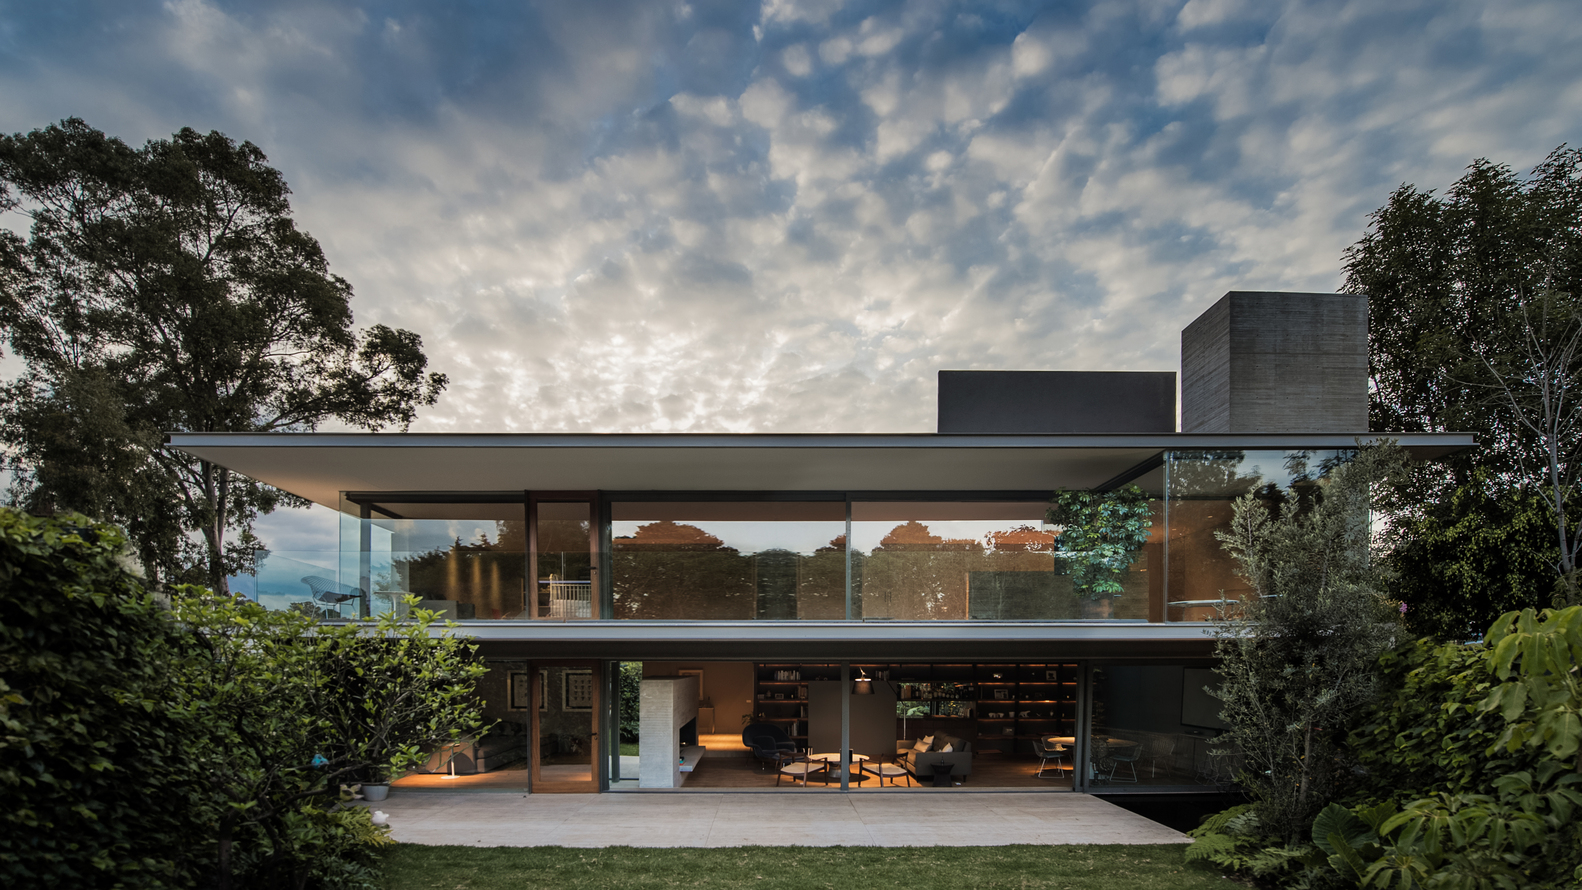 General 1582x890 house mansions modern architecture